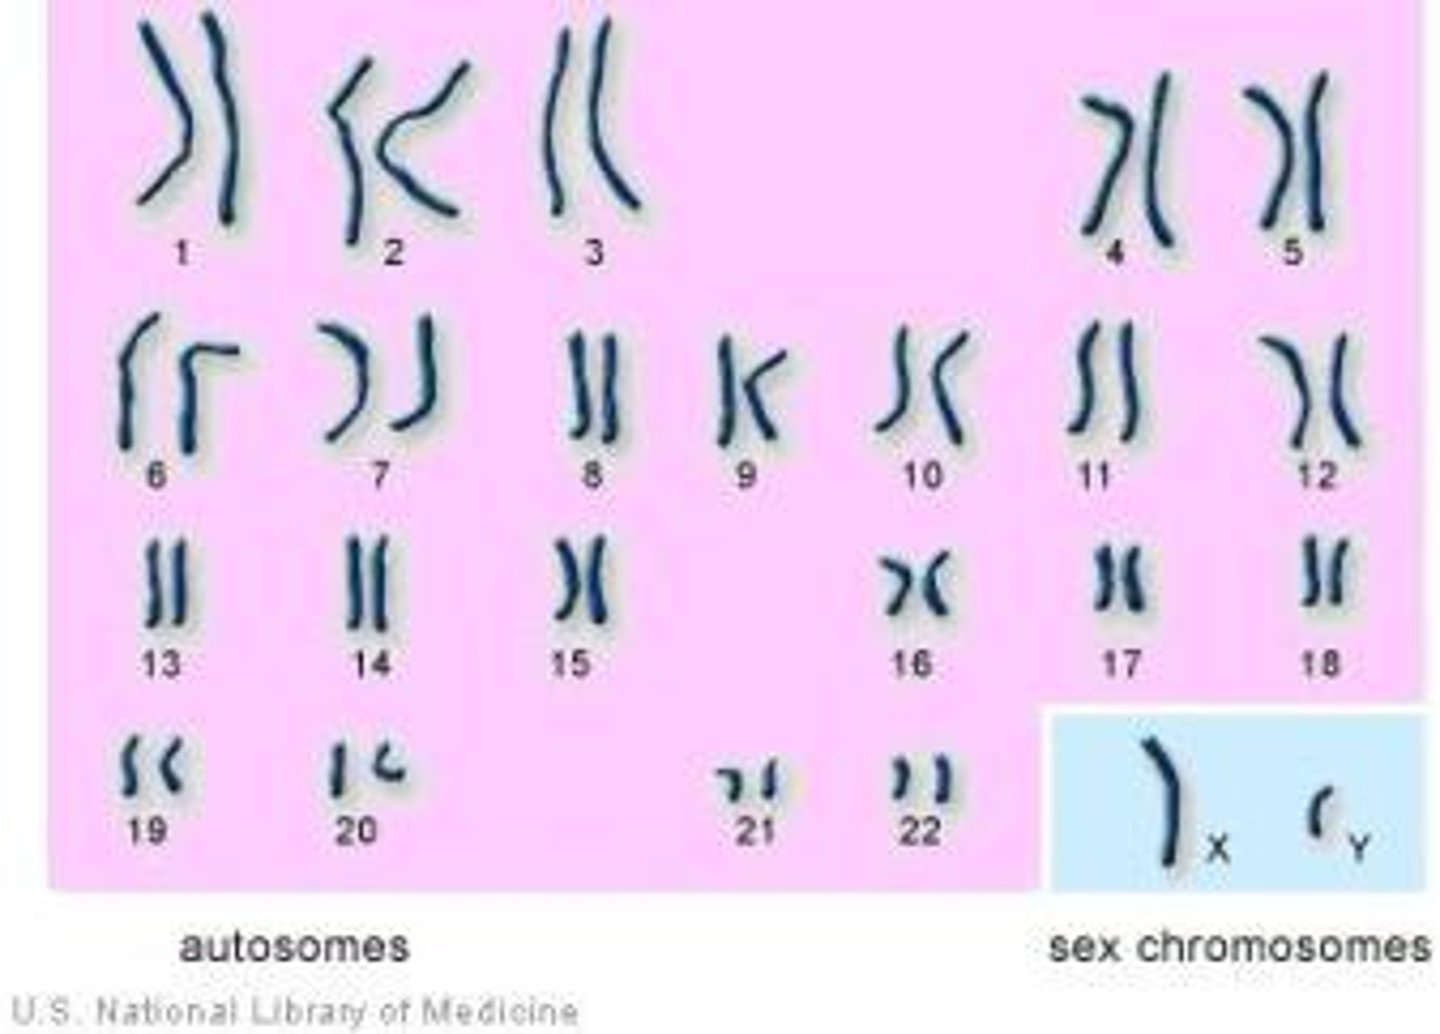 <p>Pair of chromosomes that determine the biological sex of an individual.</p>